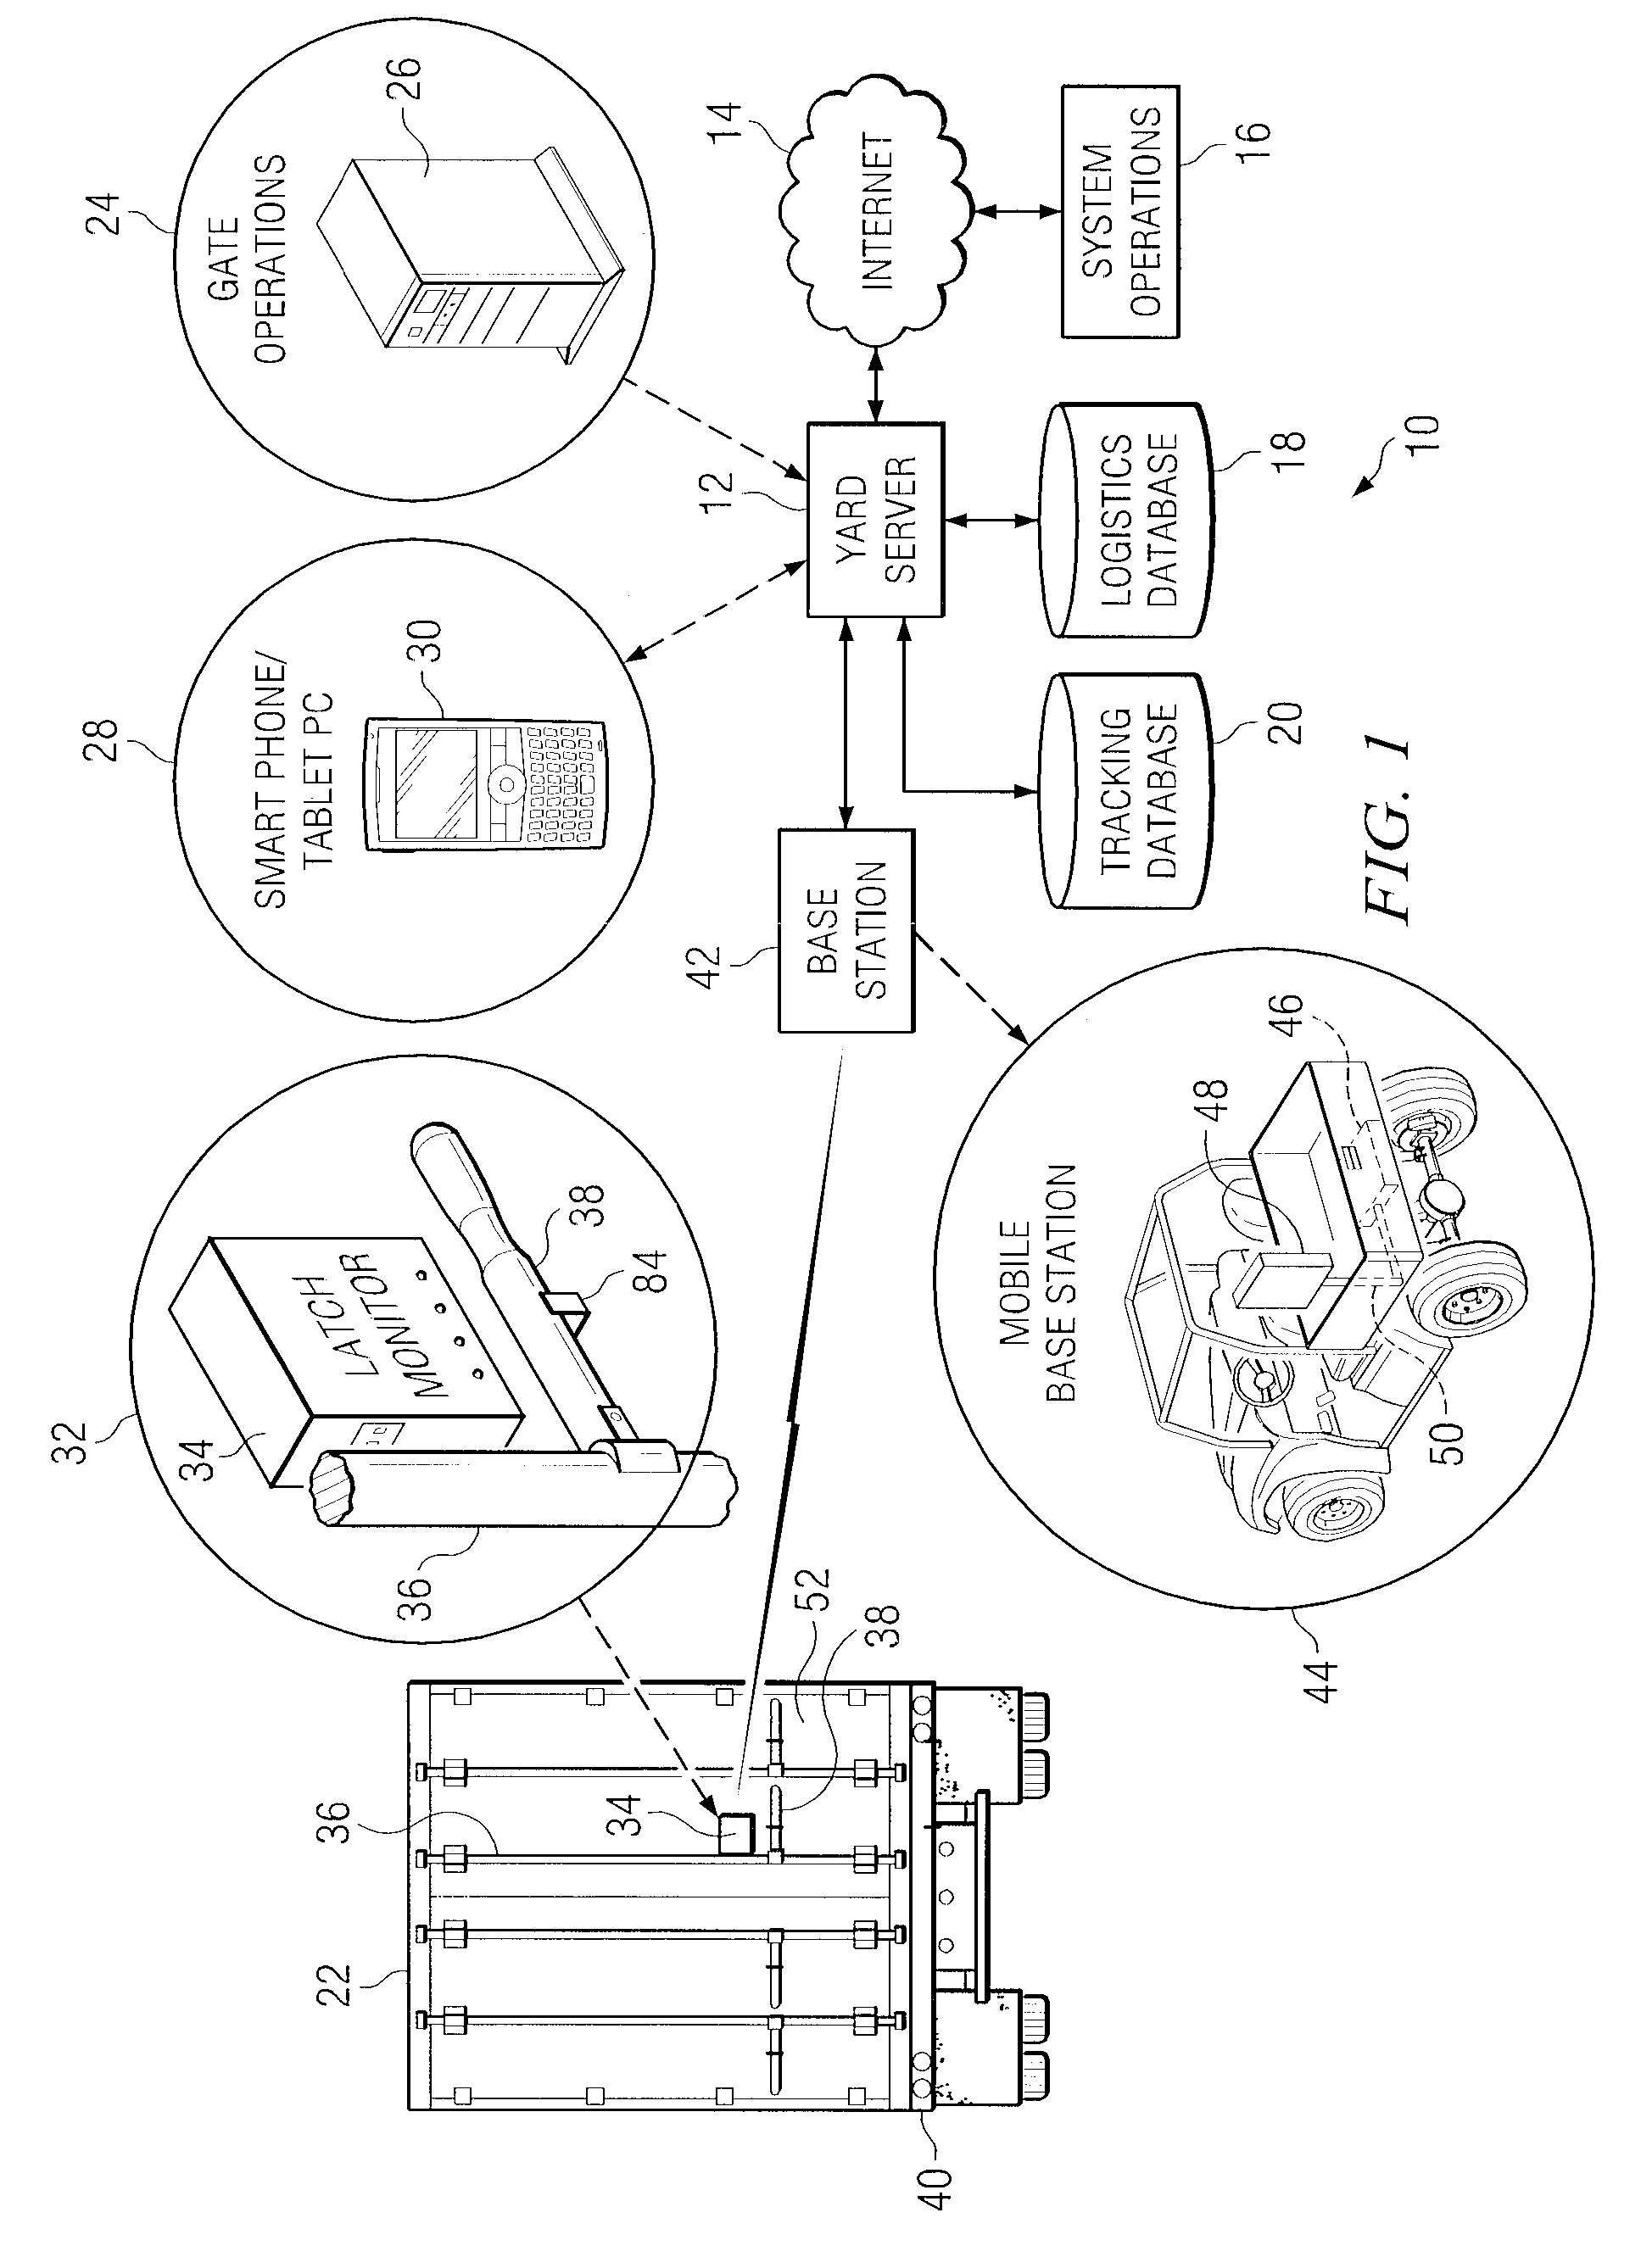 Method for Maintaining a Shipping Container Manifest